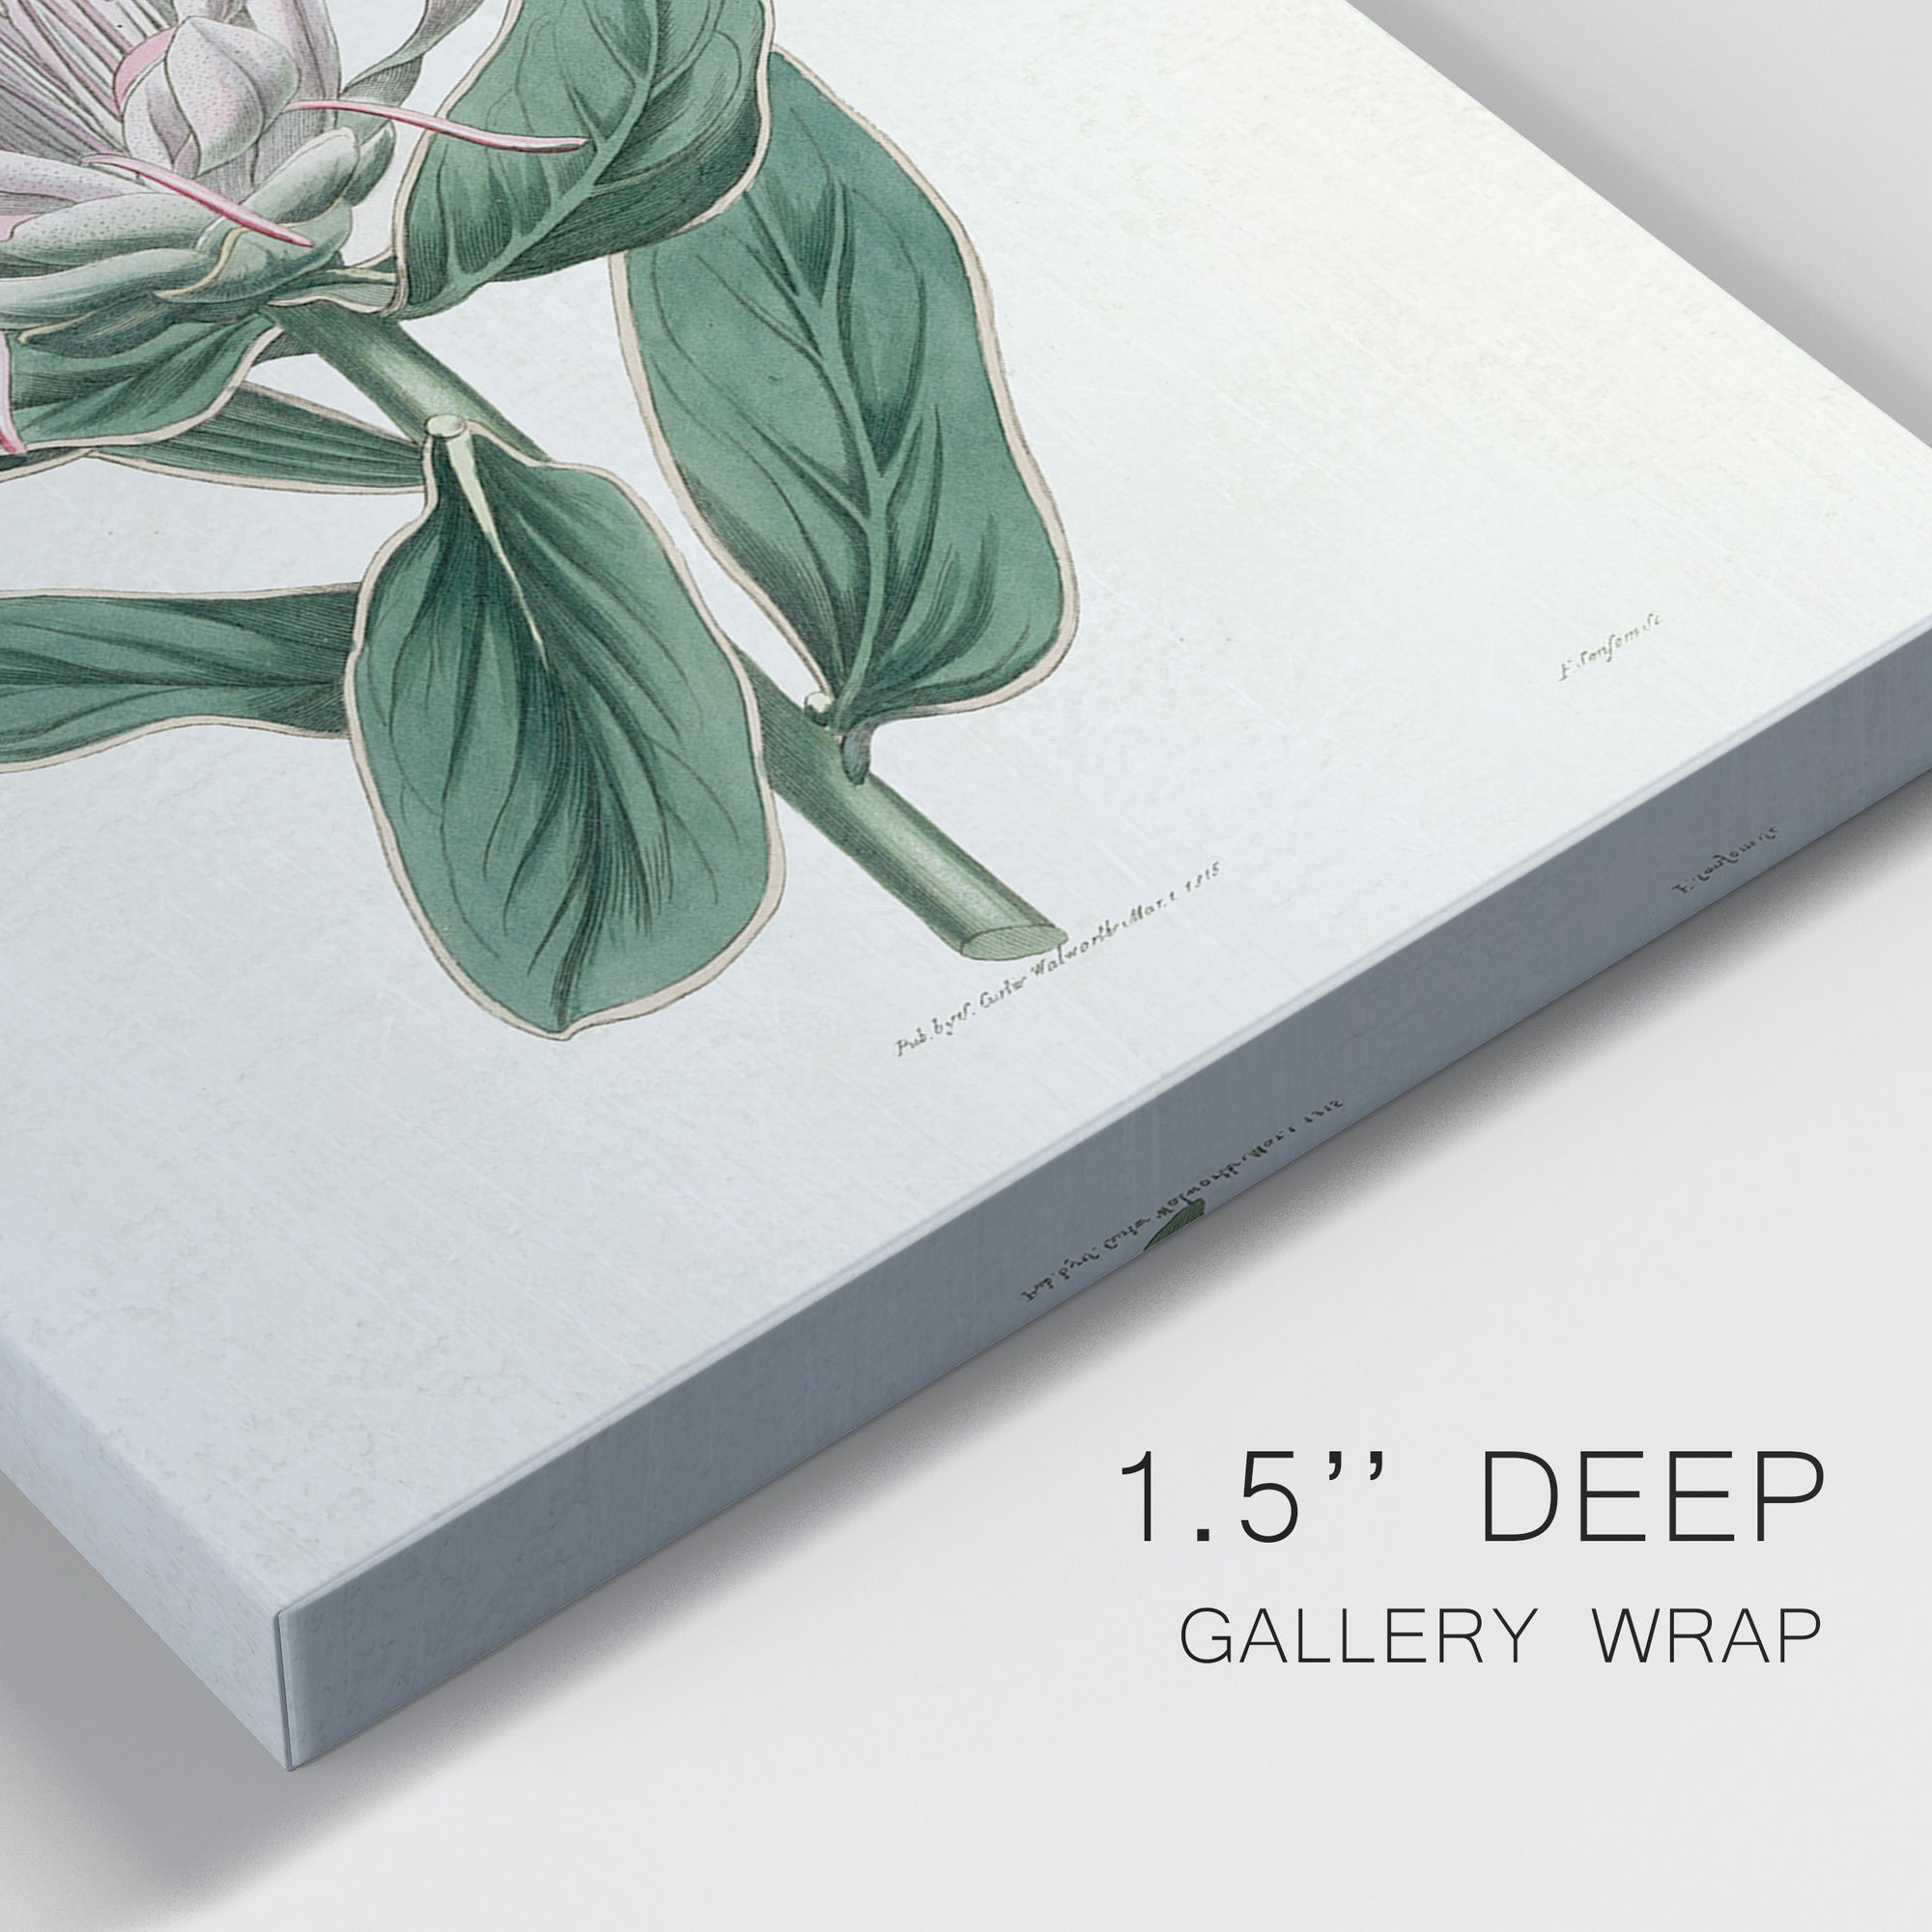 Protea N13 Premium Gallery Wrapped Canvas - Ready to Hang